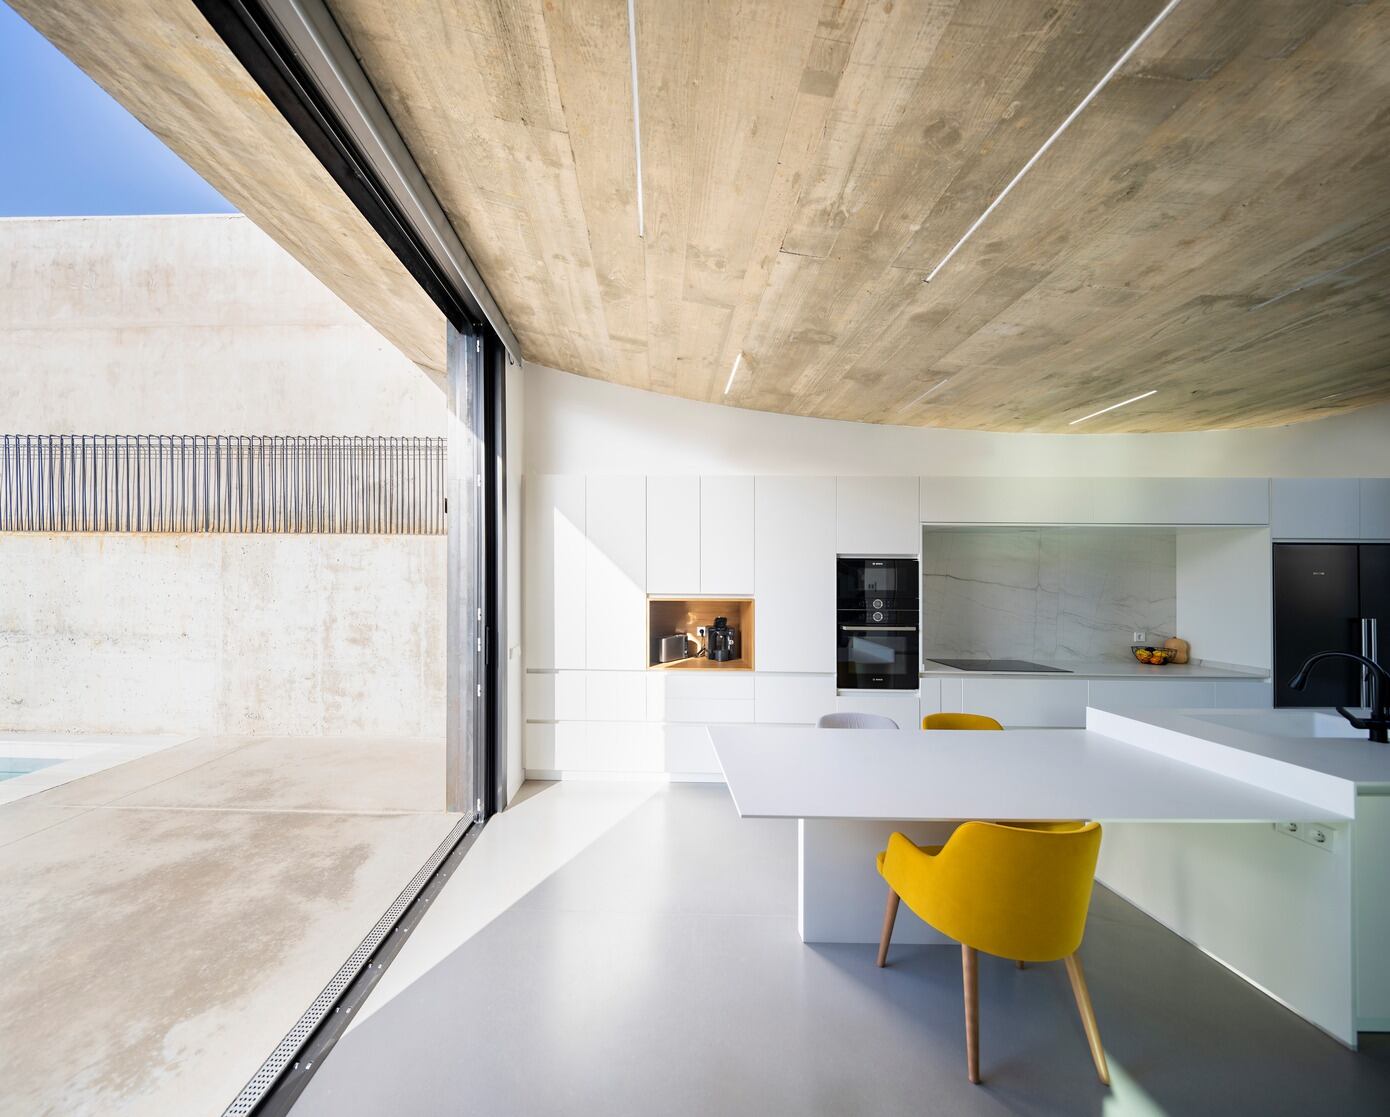 Nau House: A Two-Story Dwelling in Ciudad Real